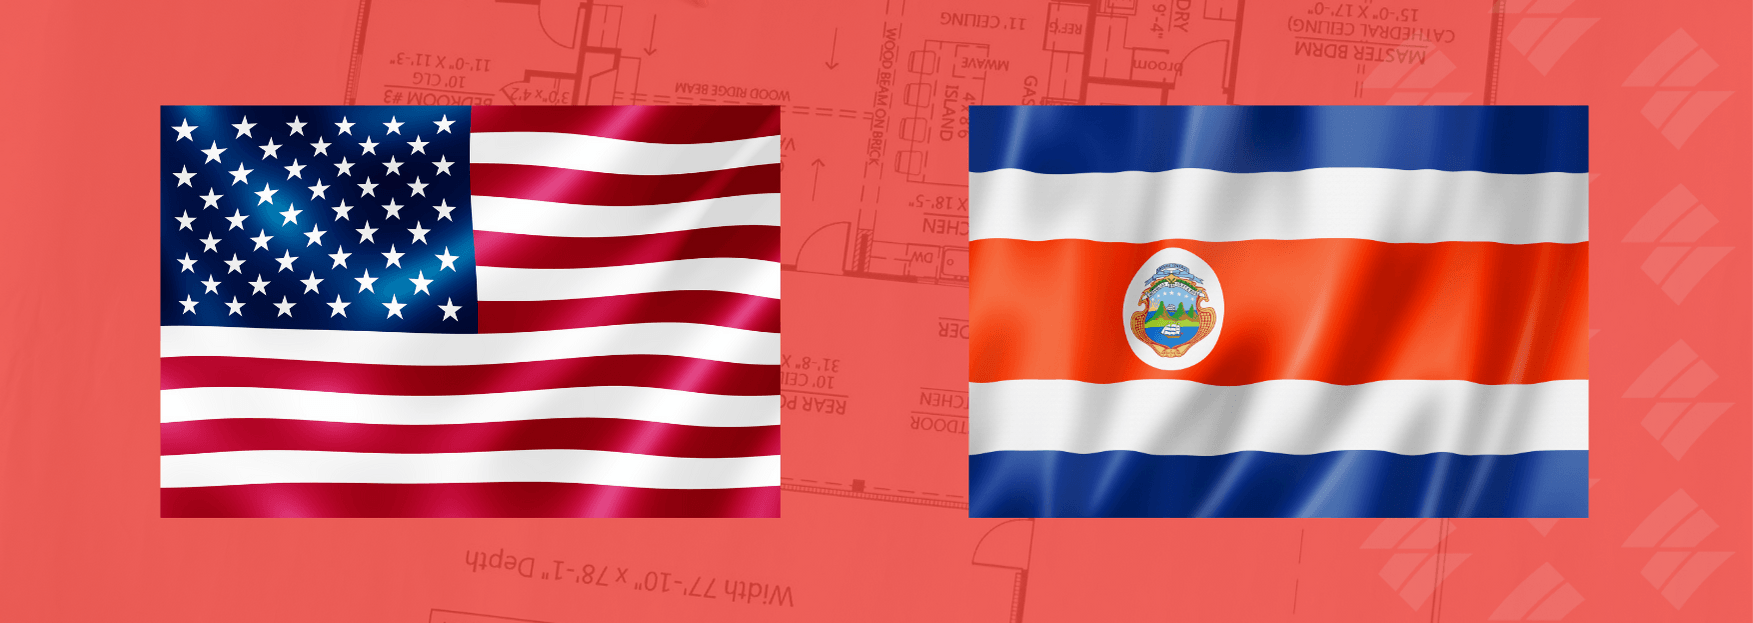 an american flag and a costa rican flag on a red background